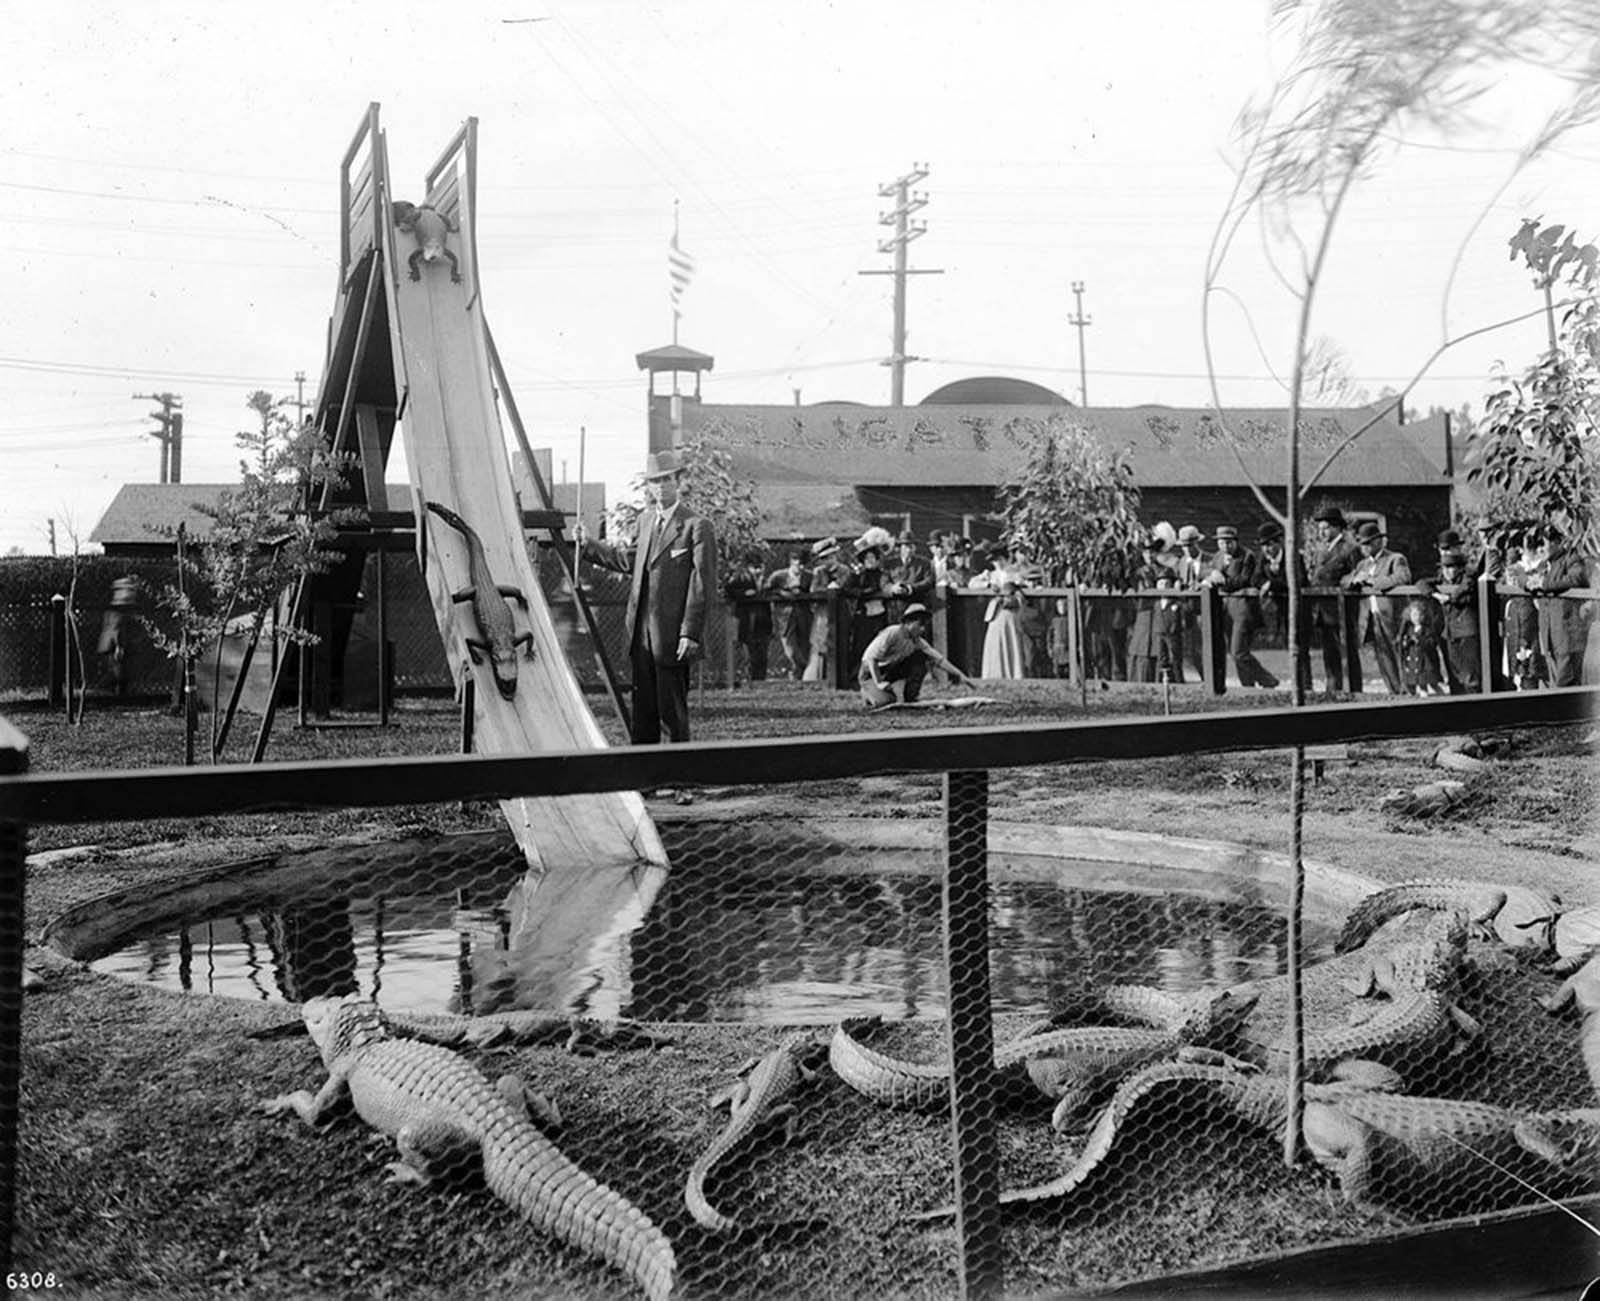 Alligator slides were one of the park’s most popular attractions.